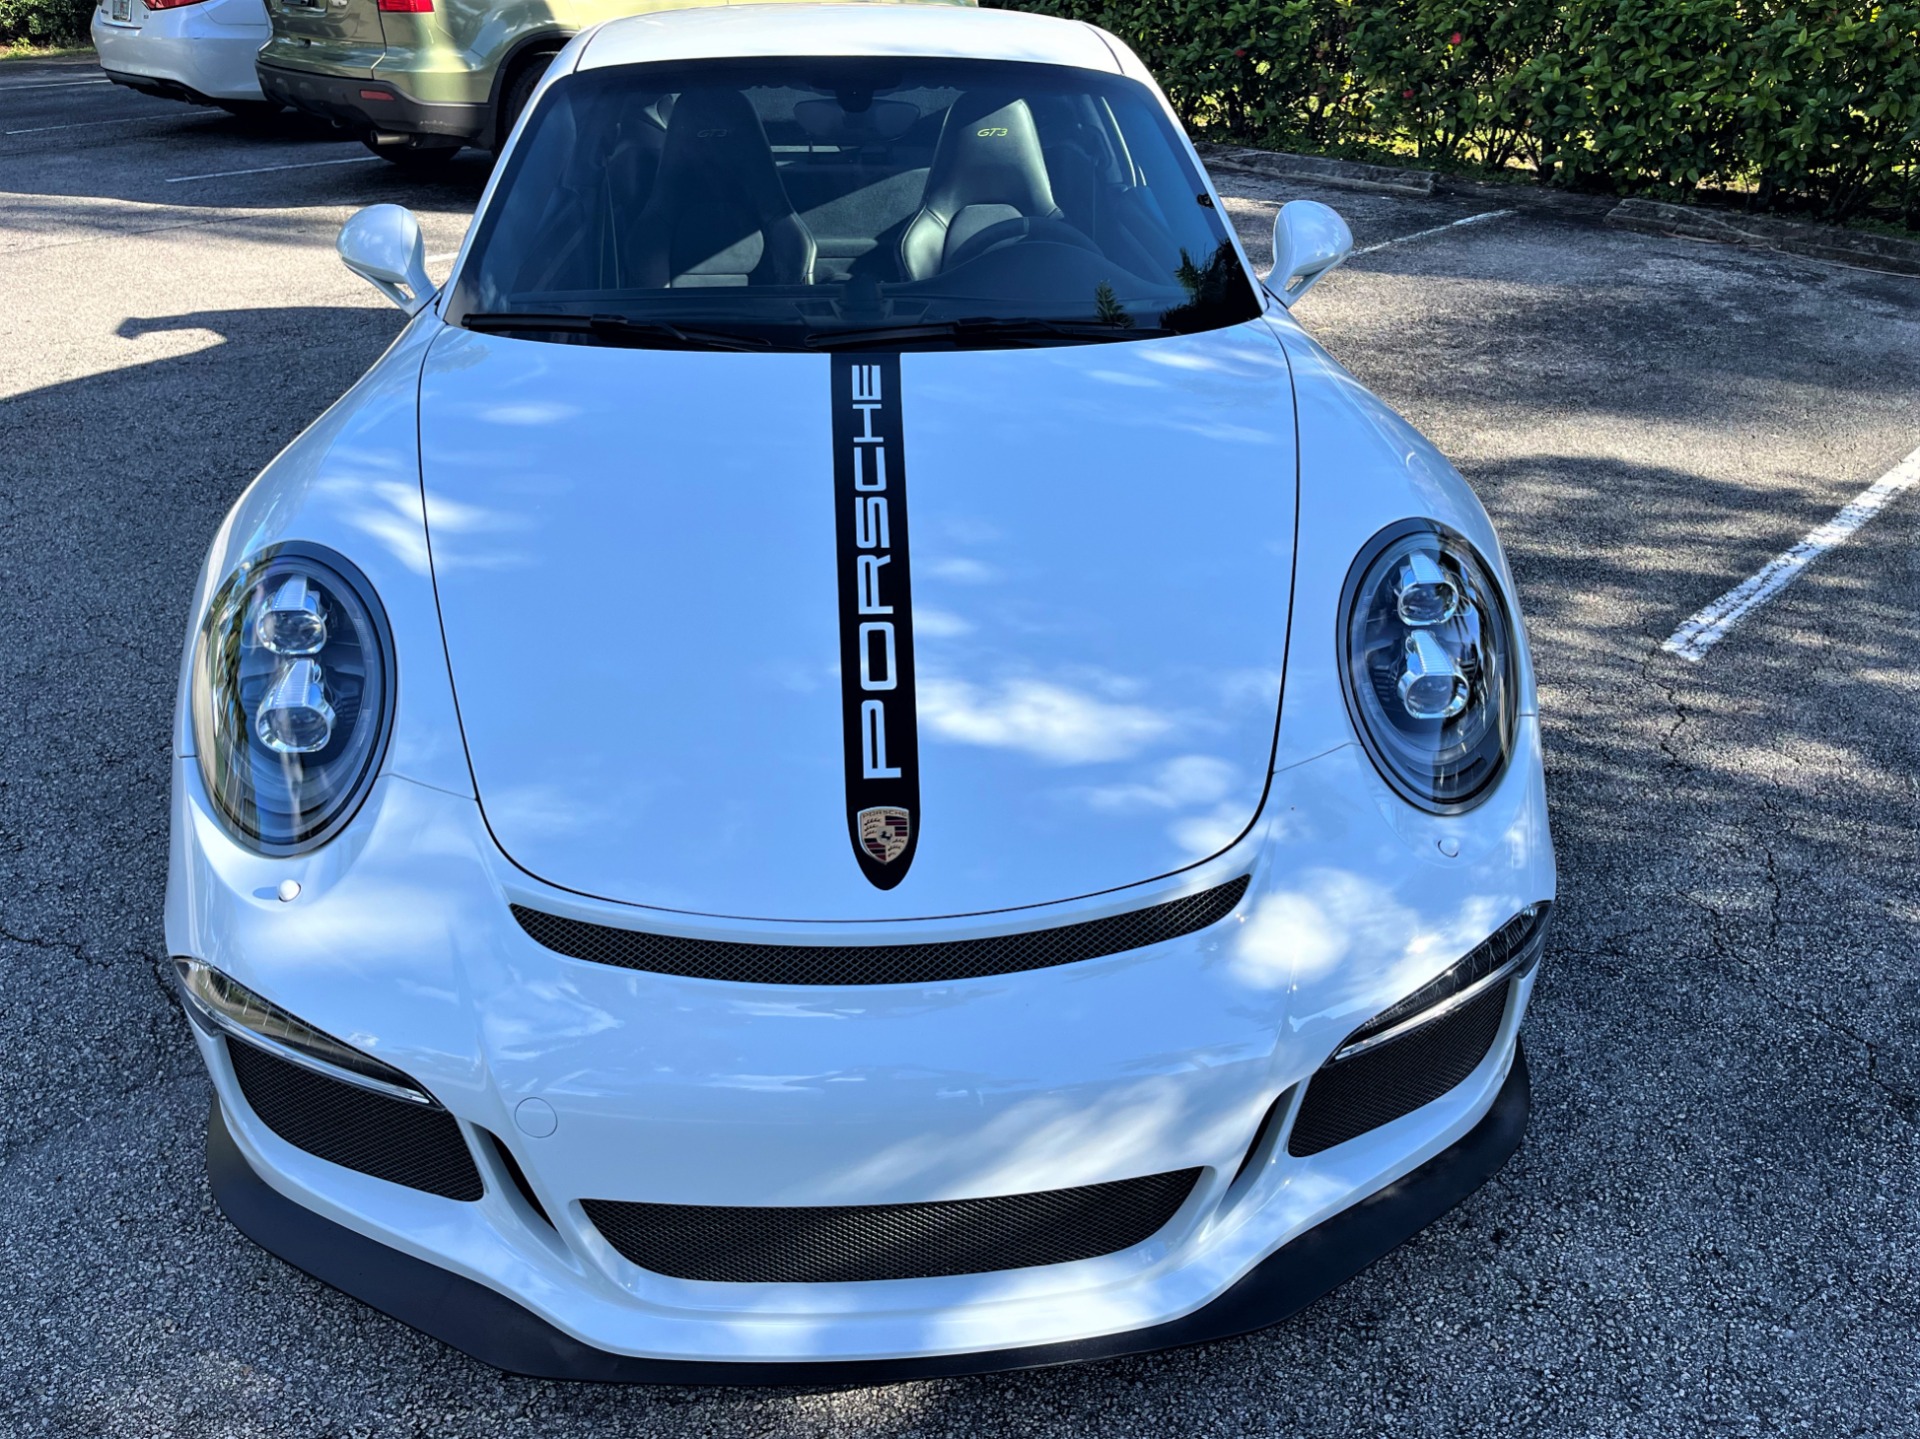 Used 2015 Porsche 911 GT3 for sale $142,850 at The Gables Sports Cars in Miami FL 33146 4